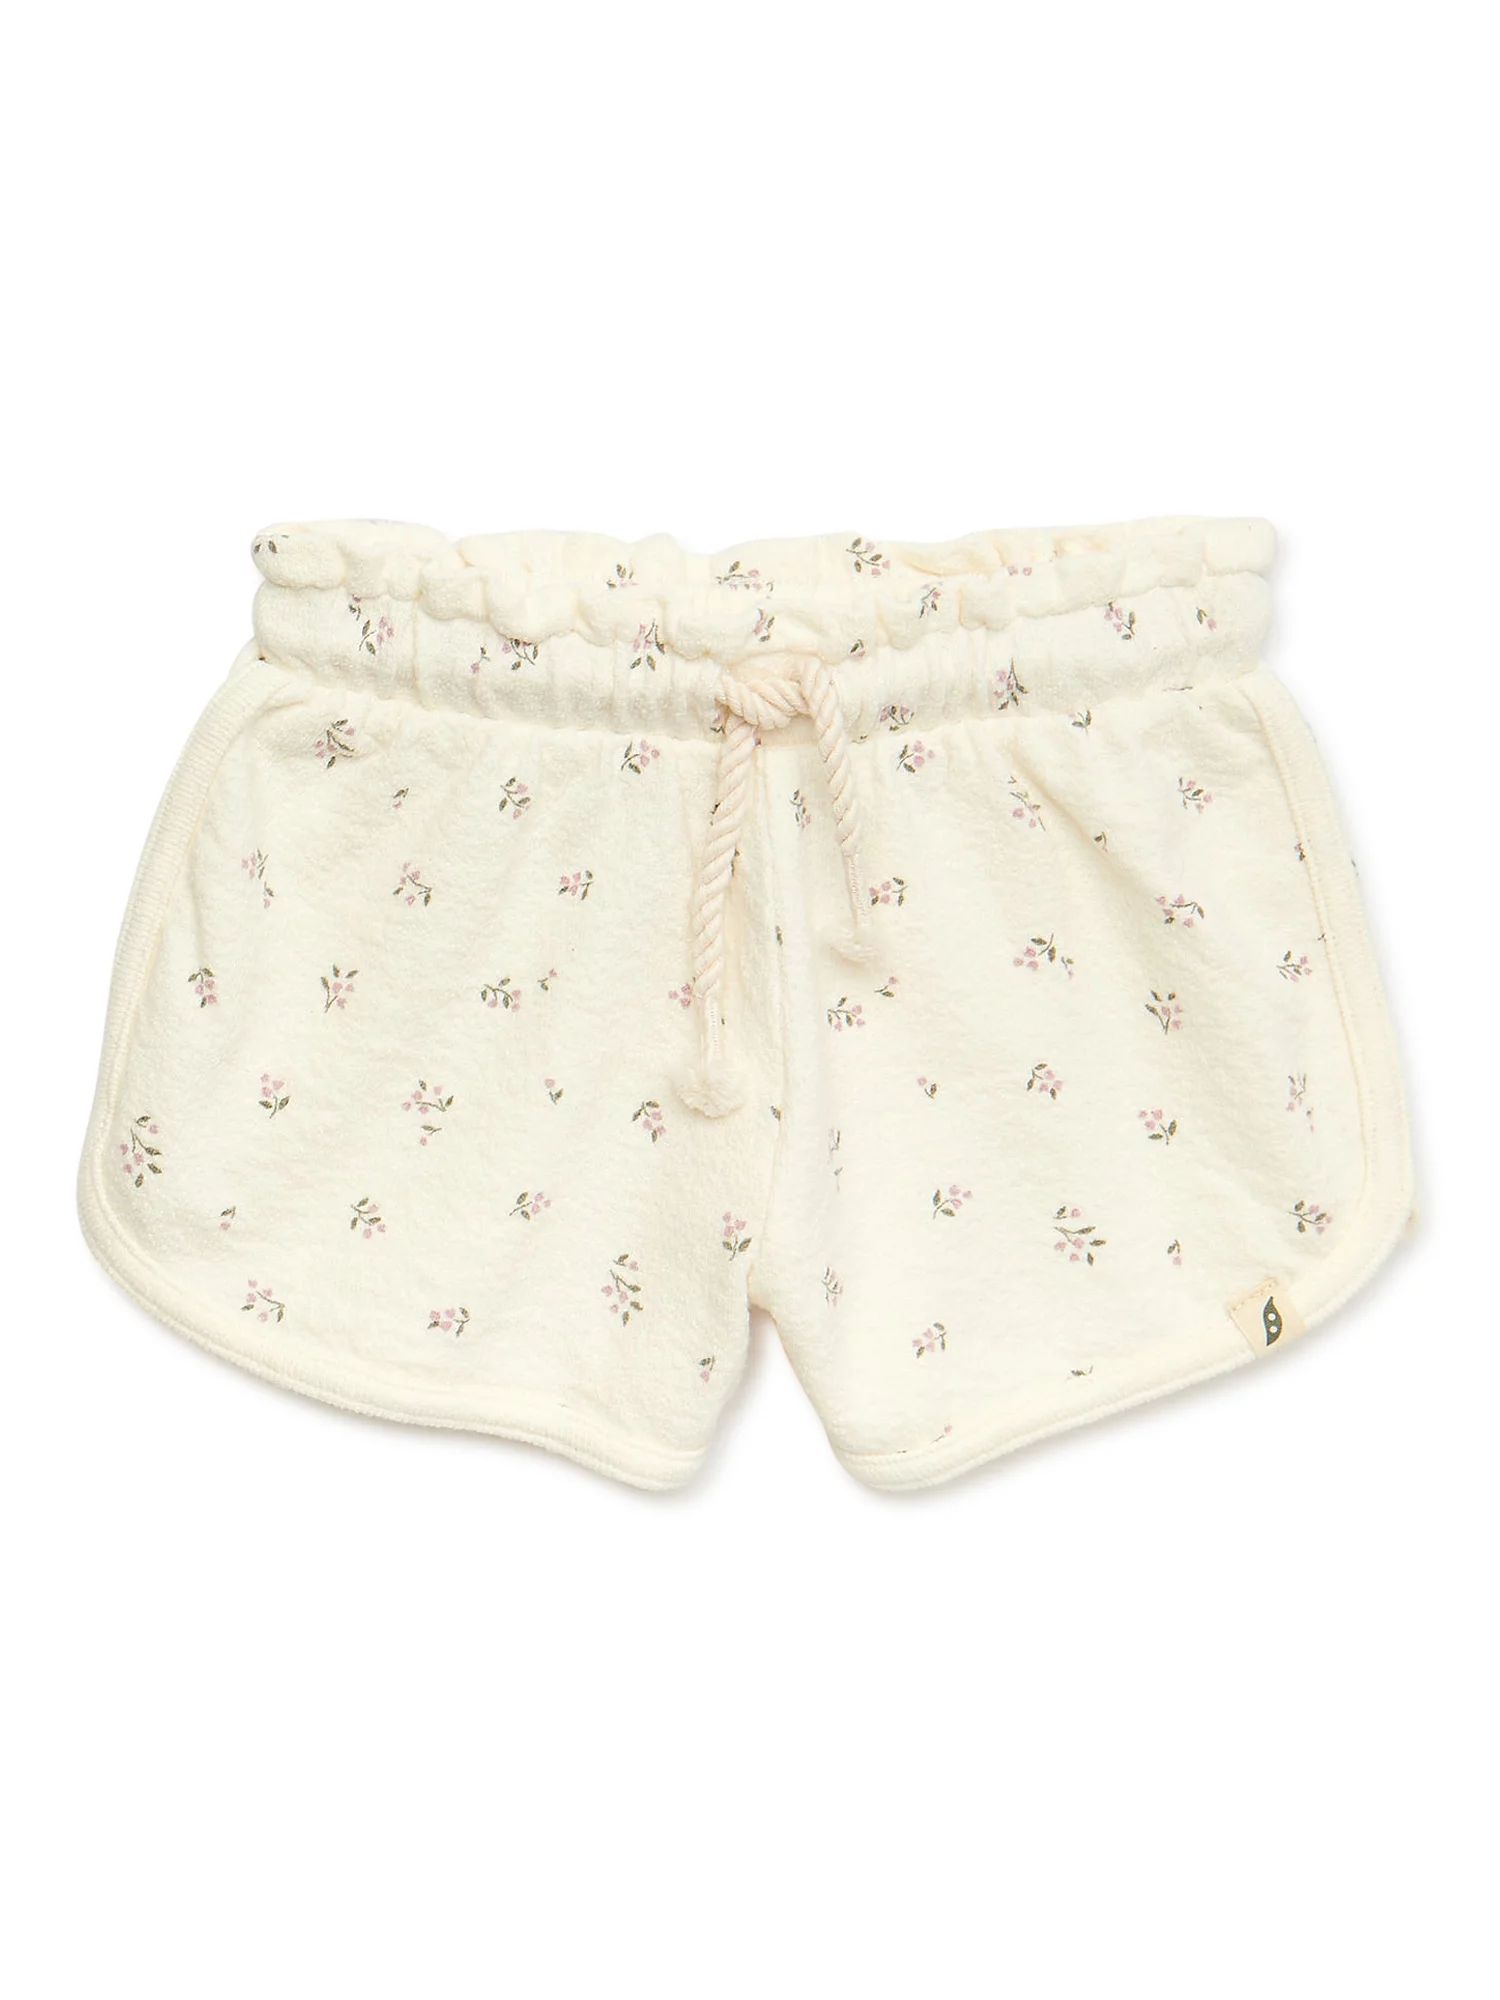 easy-peasy Toddler Girls Pull On Knit Shorts, Sizes 12M-5T | Walmart (US)